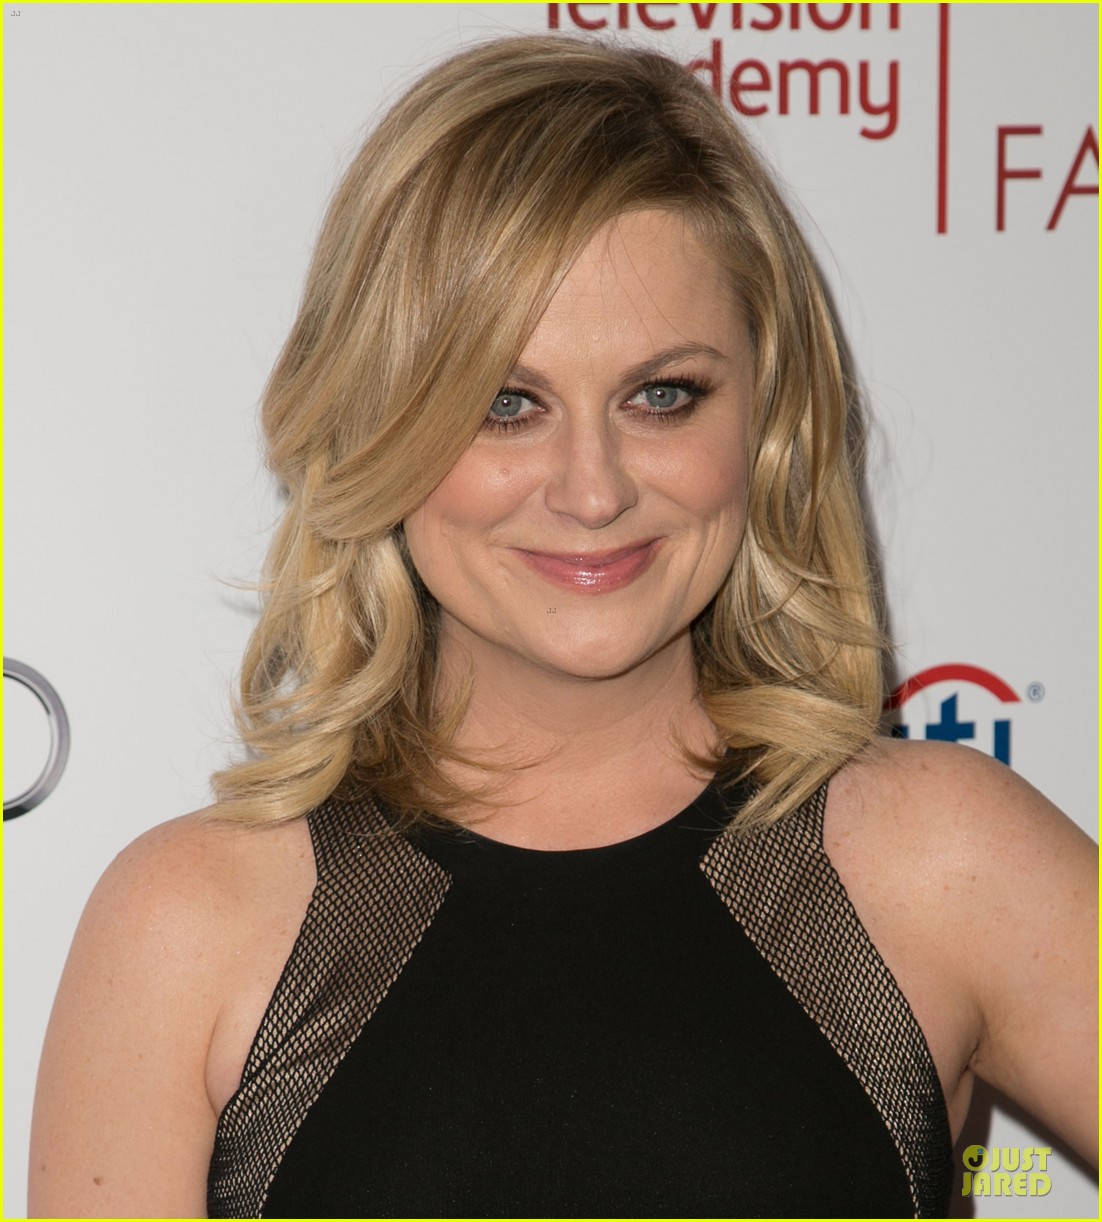 Hollywood Actress Comedian Amy Poehler Background